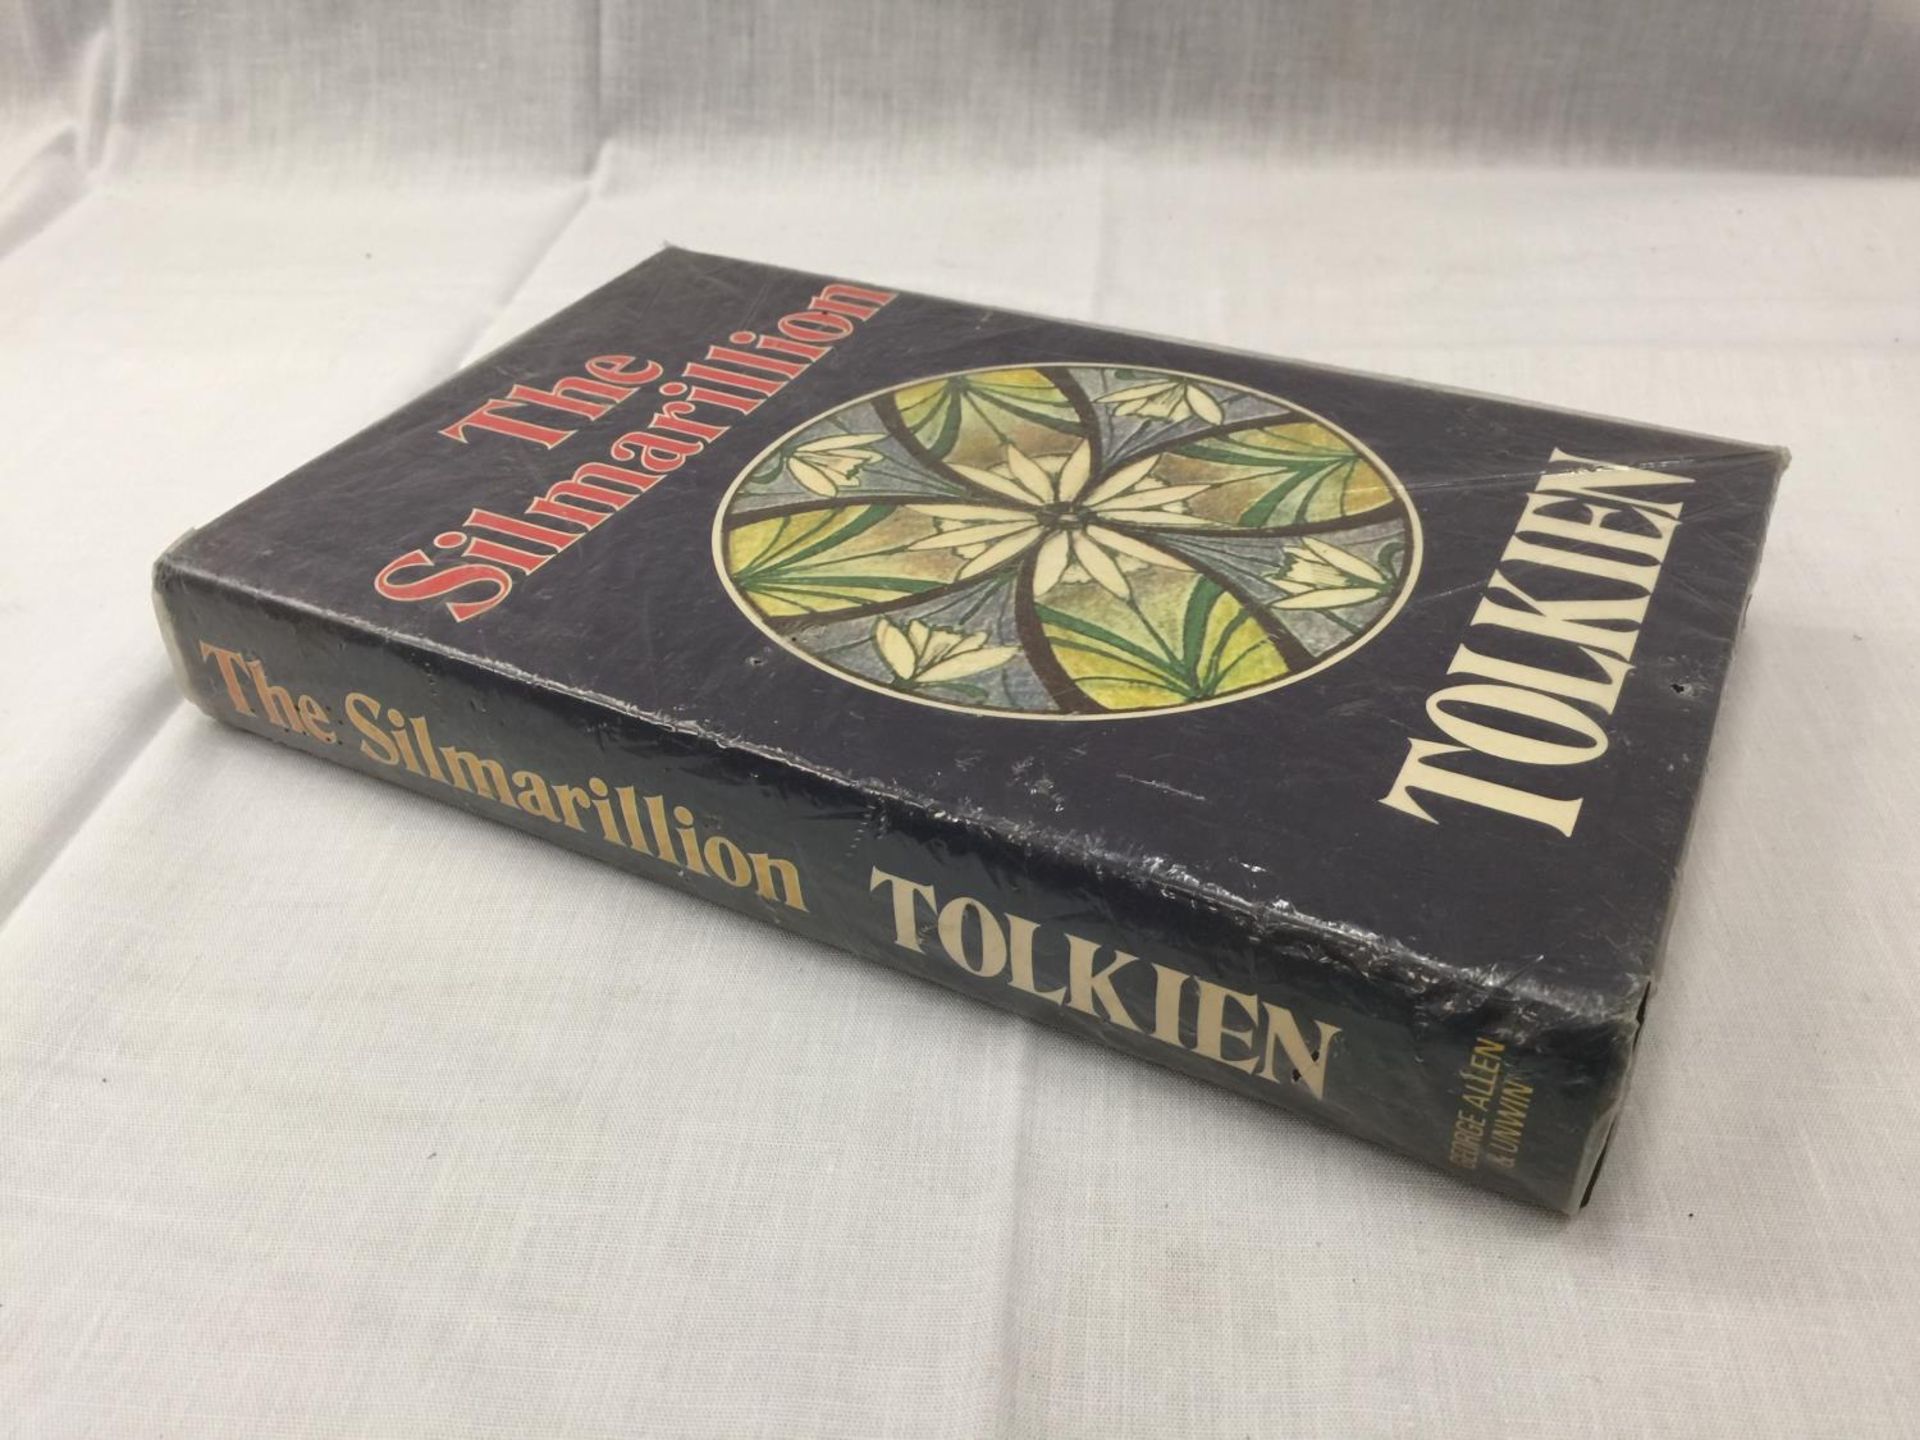 TWO BOOKS BY J.R.R. TOLKIEN, ONE BEING A FIRST EDITION 'THE SILMARILLION' HARDBACK WITH DUST COVER - Image 2 of 13